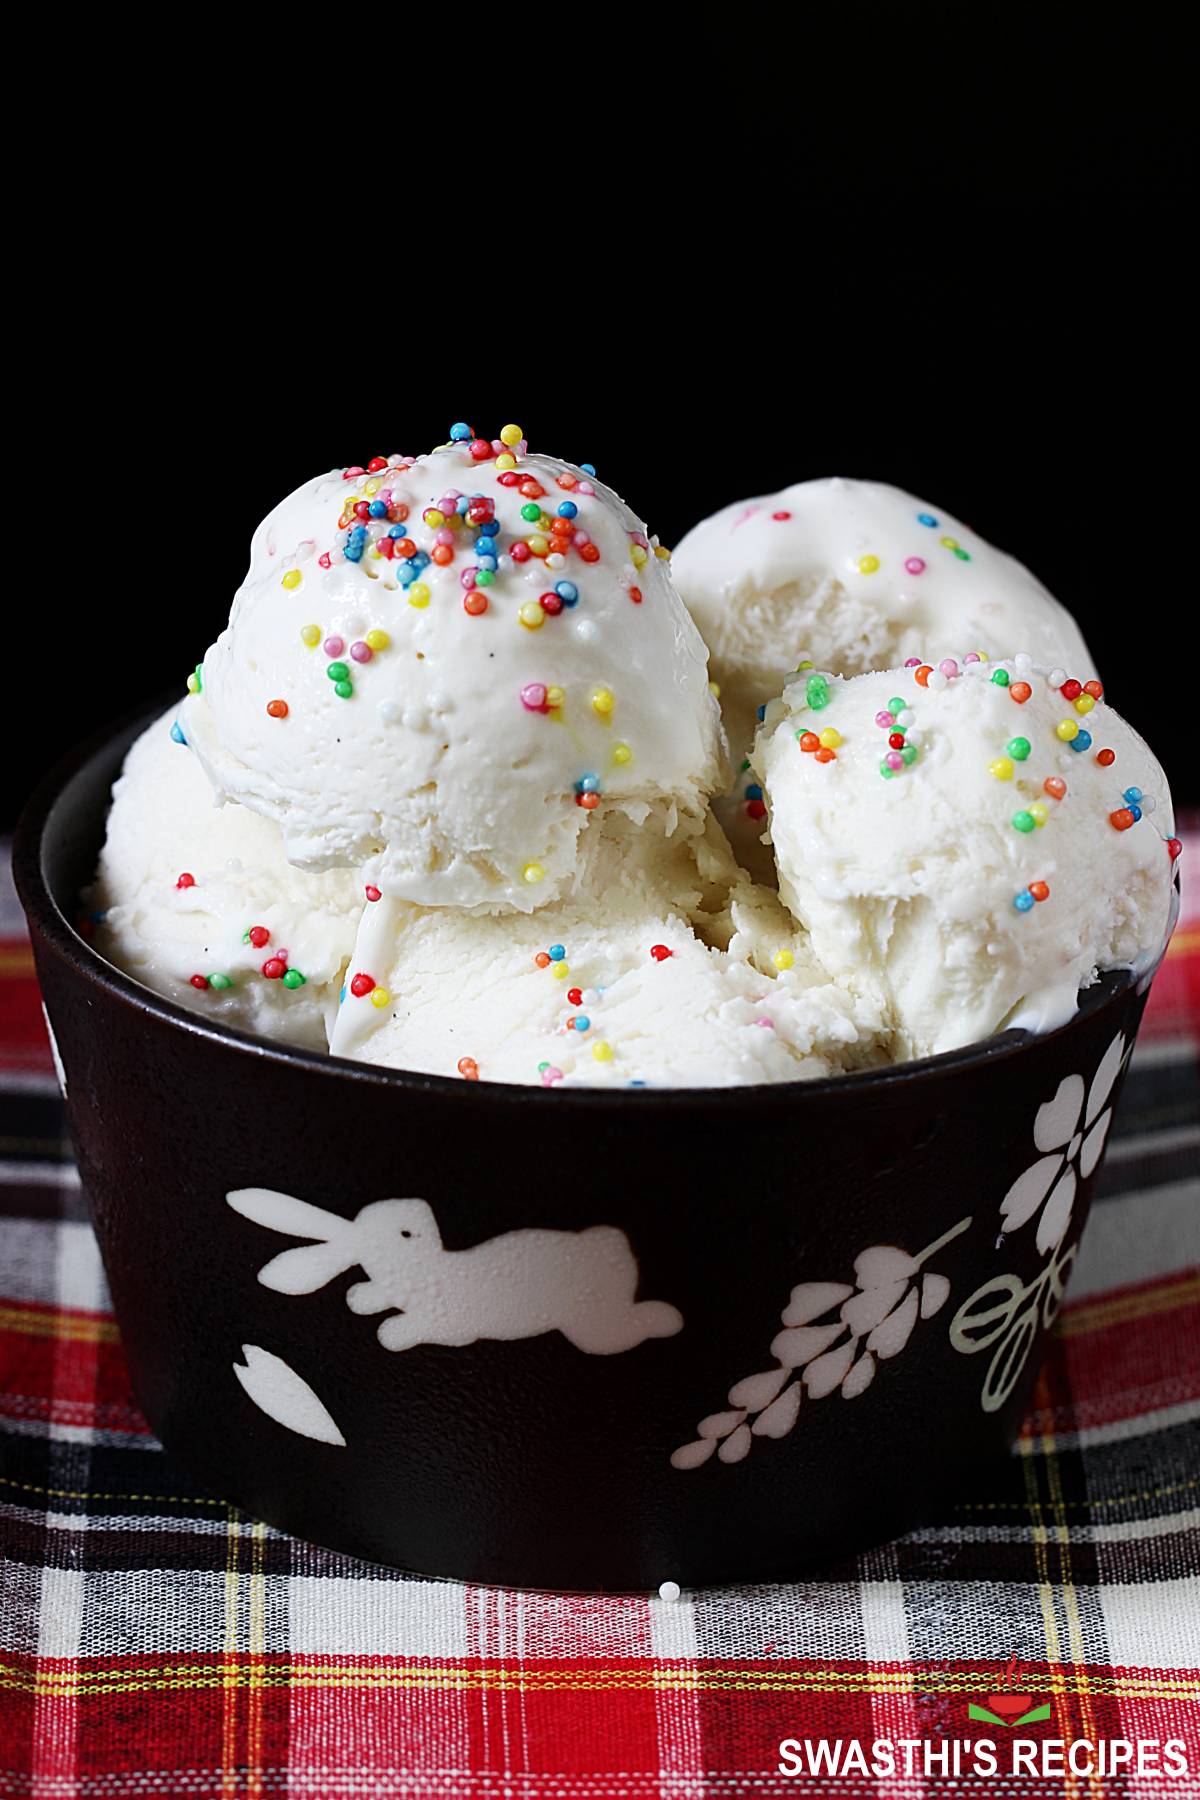 How to Make Vanilla Ice Cream in a Stand Mixer